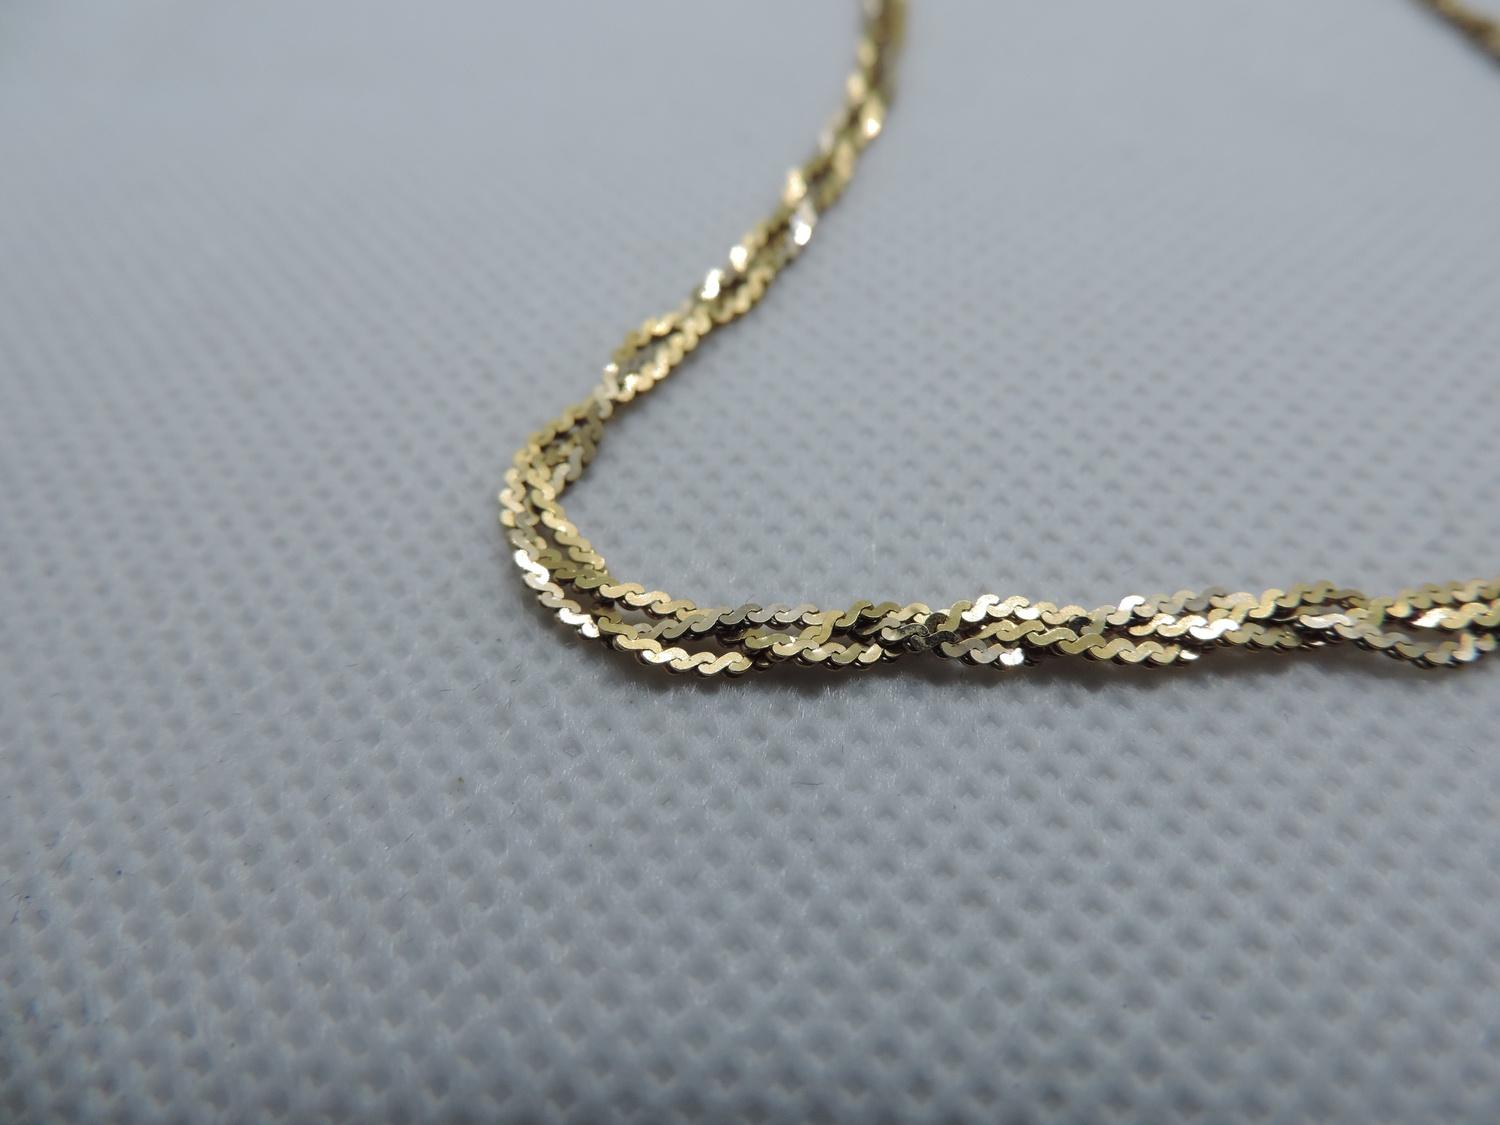 18ct Gold Necklace - 40cm Long - 7gms - Image 2 of 3